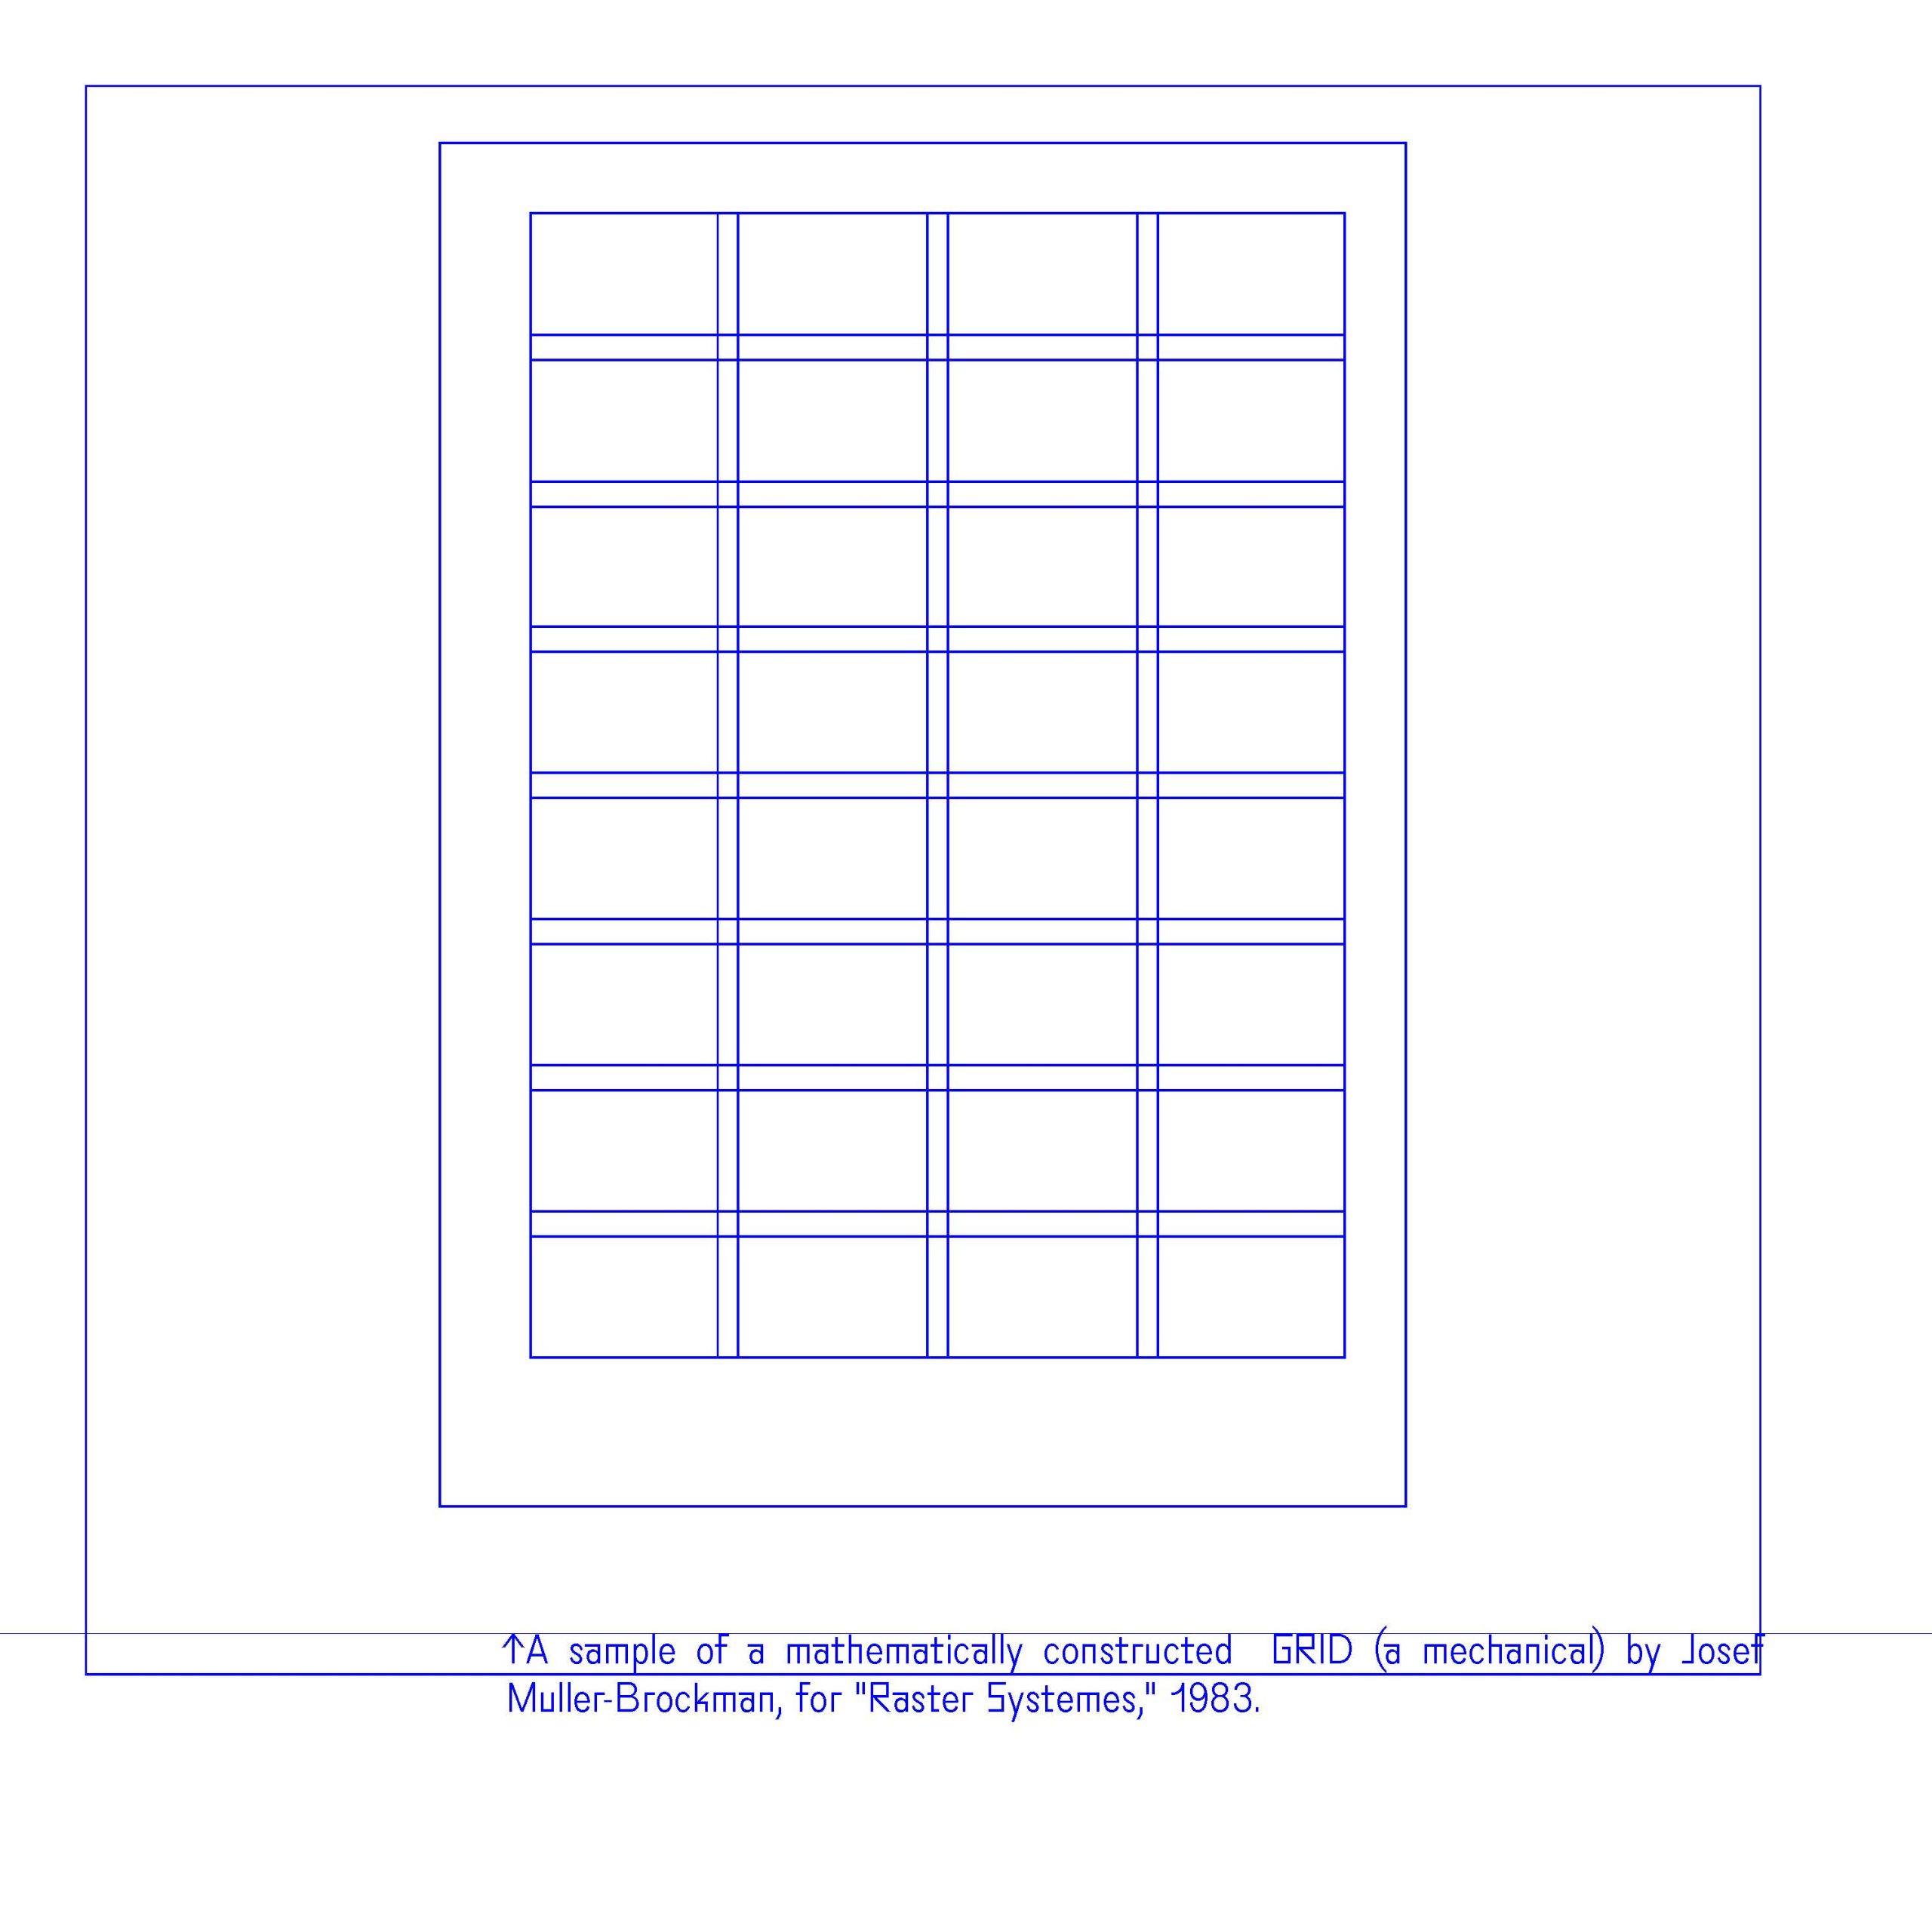 Pages from grids_a_perspective_rTejada_2020_FINAL